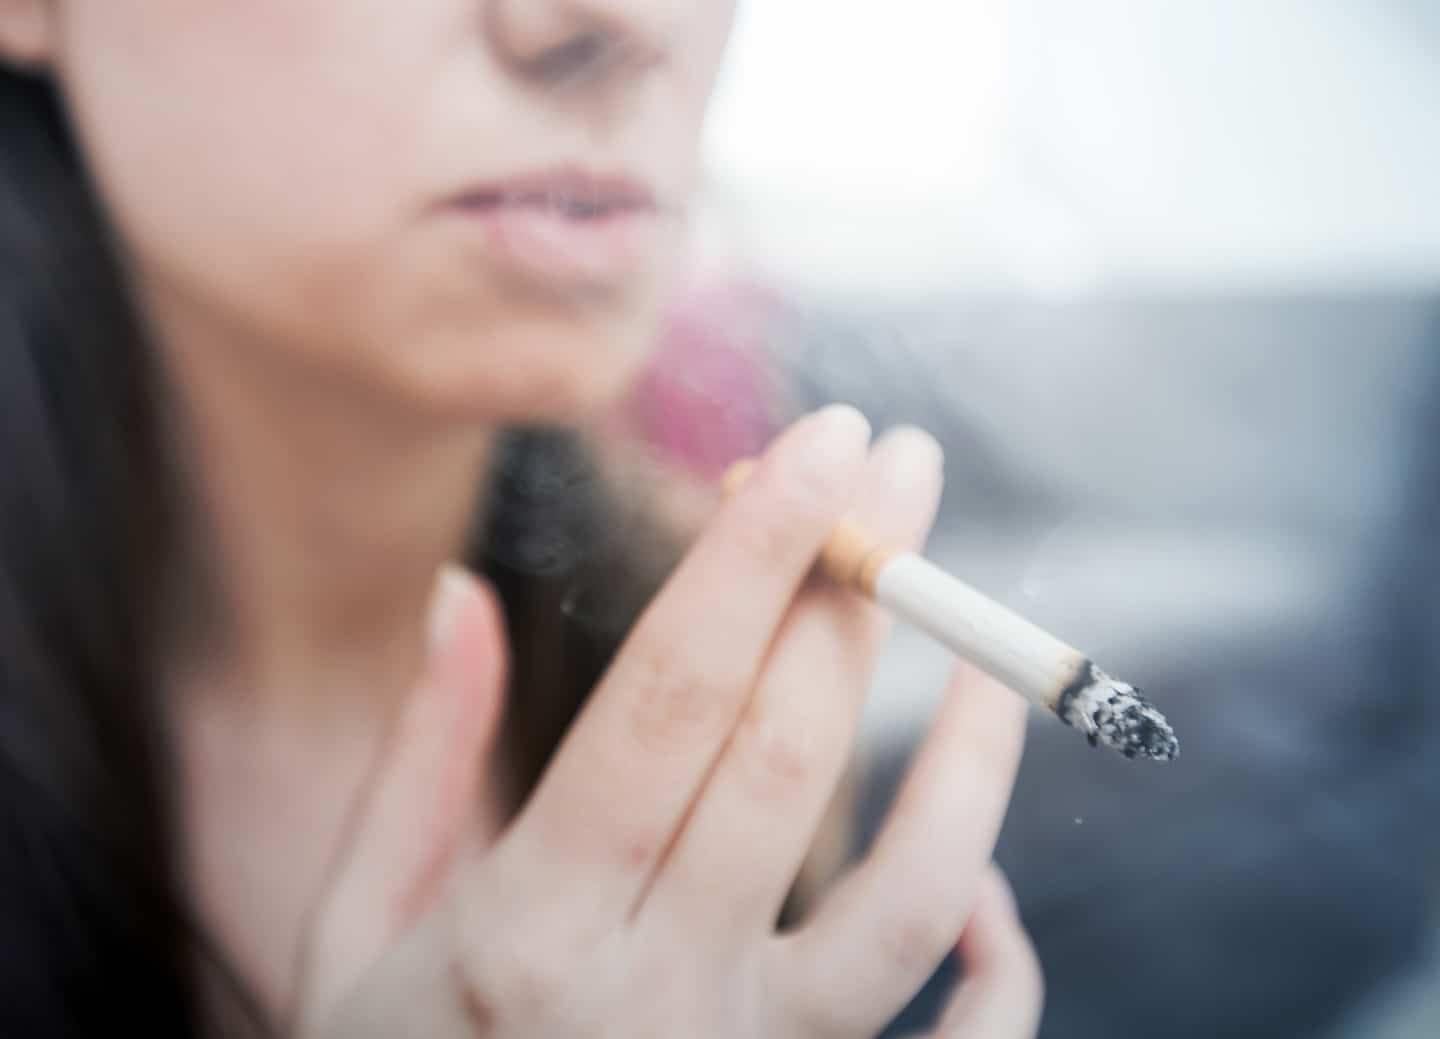 Canada proposes to put health warnings on every cigarette